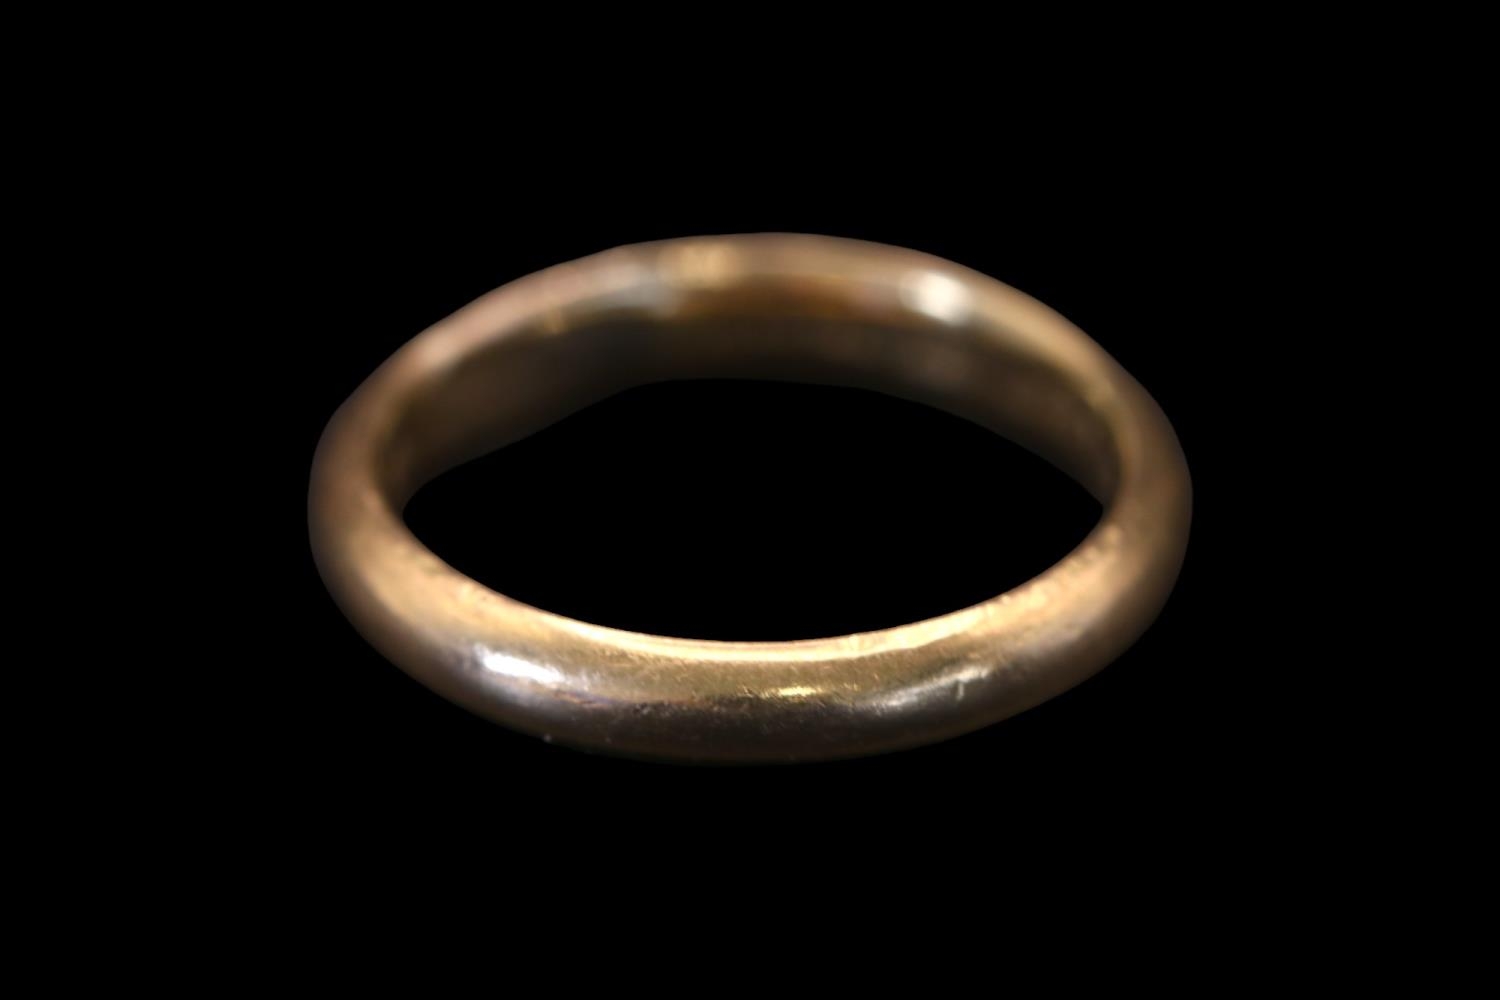 18ct Gold Tiffany & Co Court Shaped wedding band with inscription to interior. Size M, 4.4g total